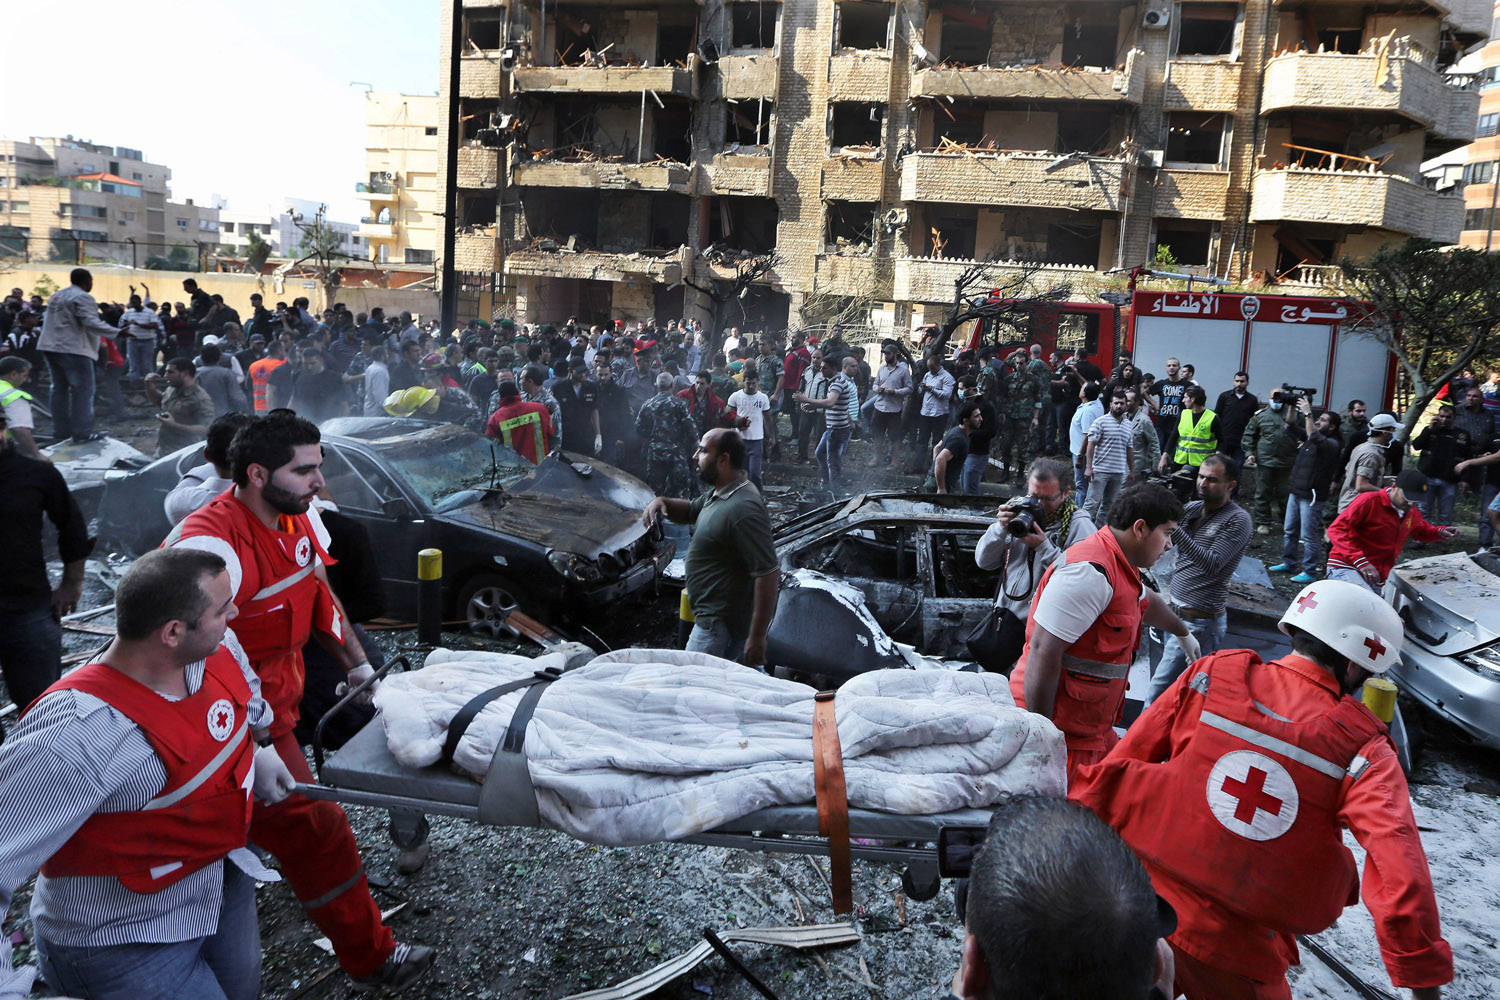 Nov. 19, 2013. Lebanese Red Cross workers, carry a dead body at the scene where two explosions have struck near the Iranian Embassy killing many, in Beirut, Lebanon.